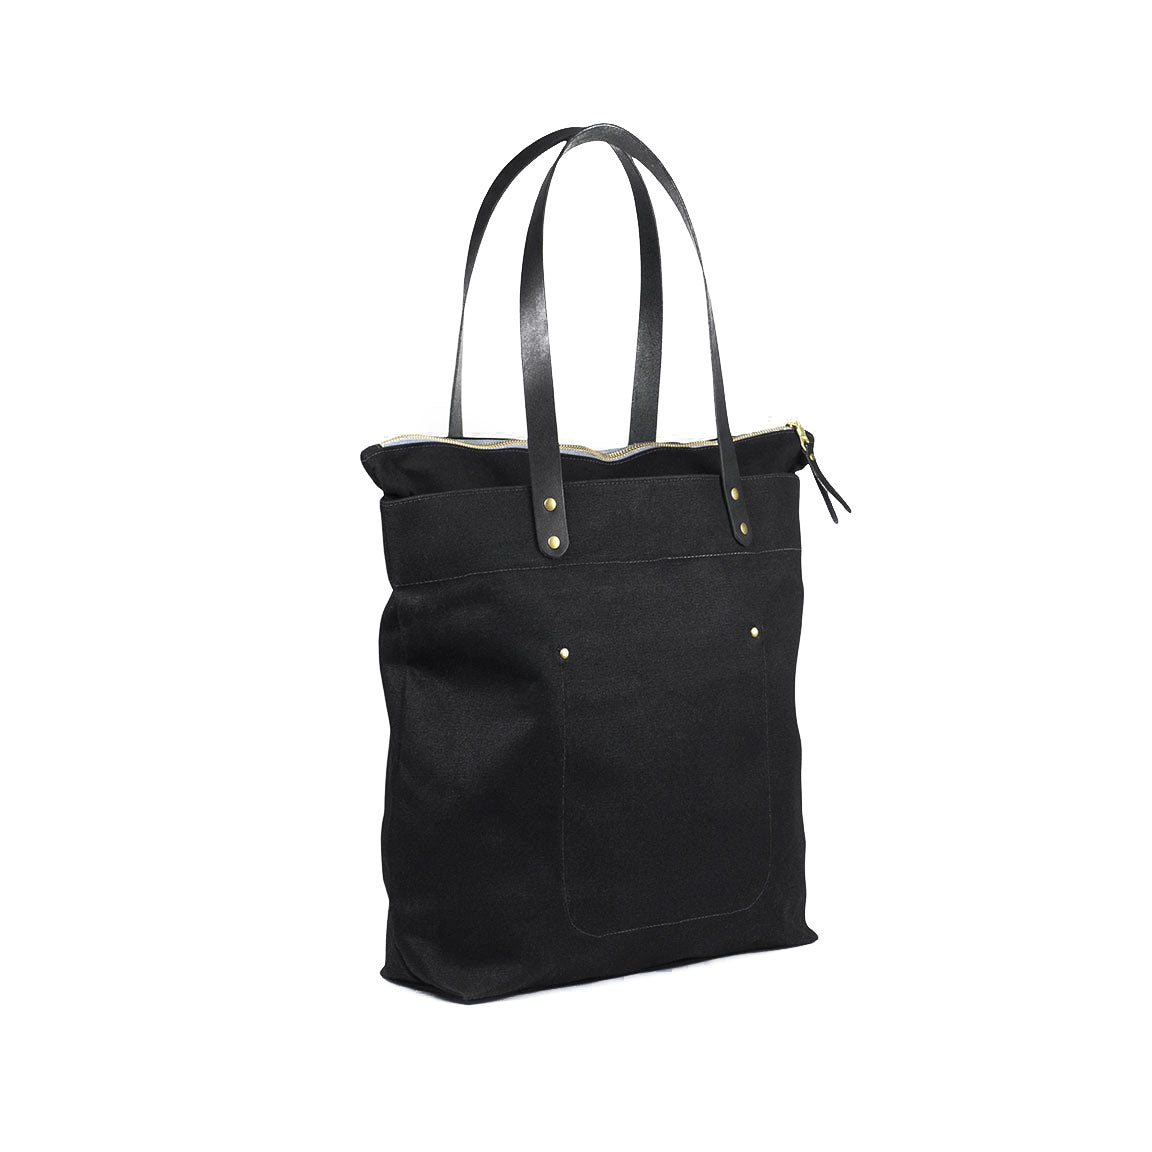 Zipper Tote Black Waxed Canvas & Black Leather